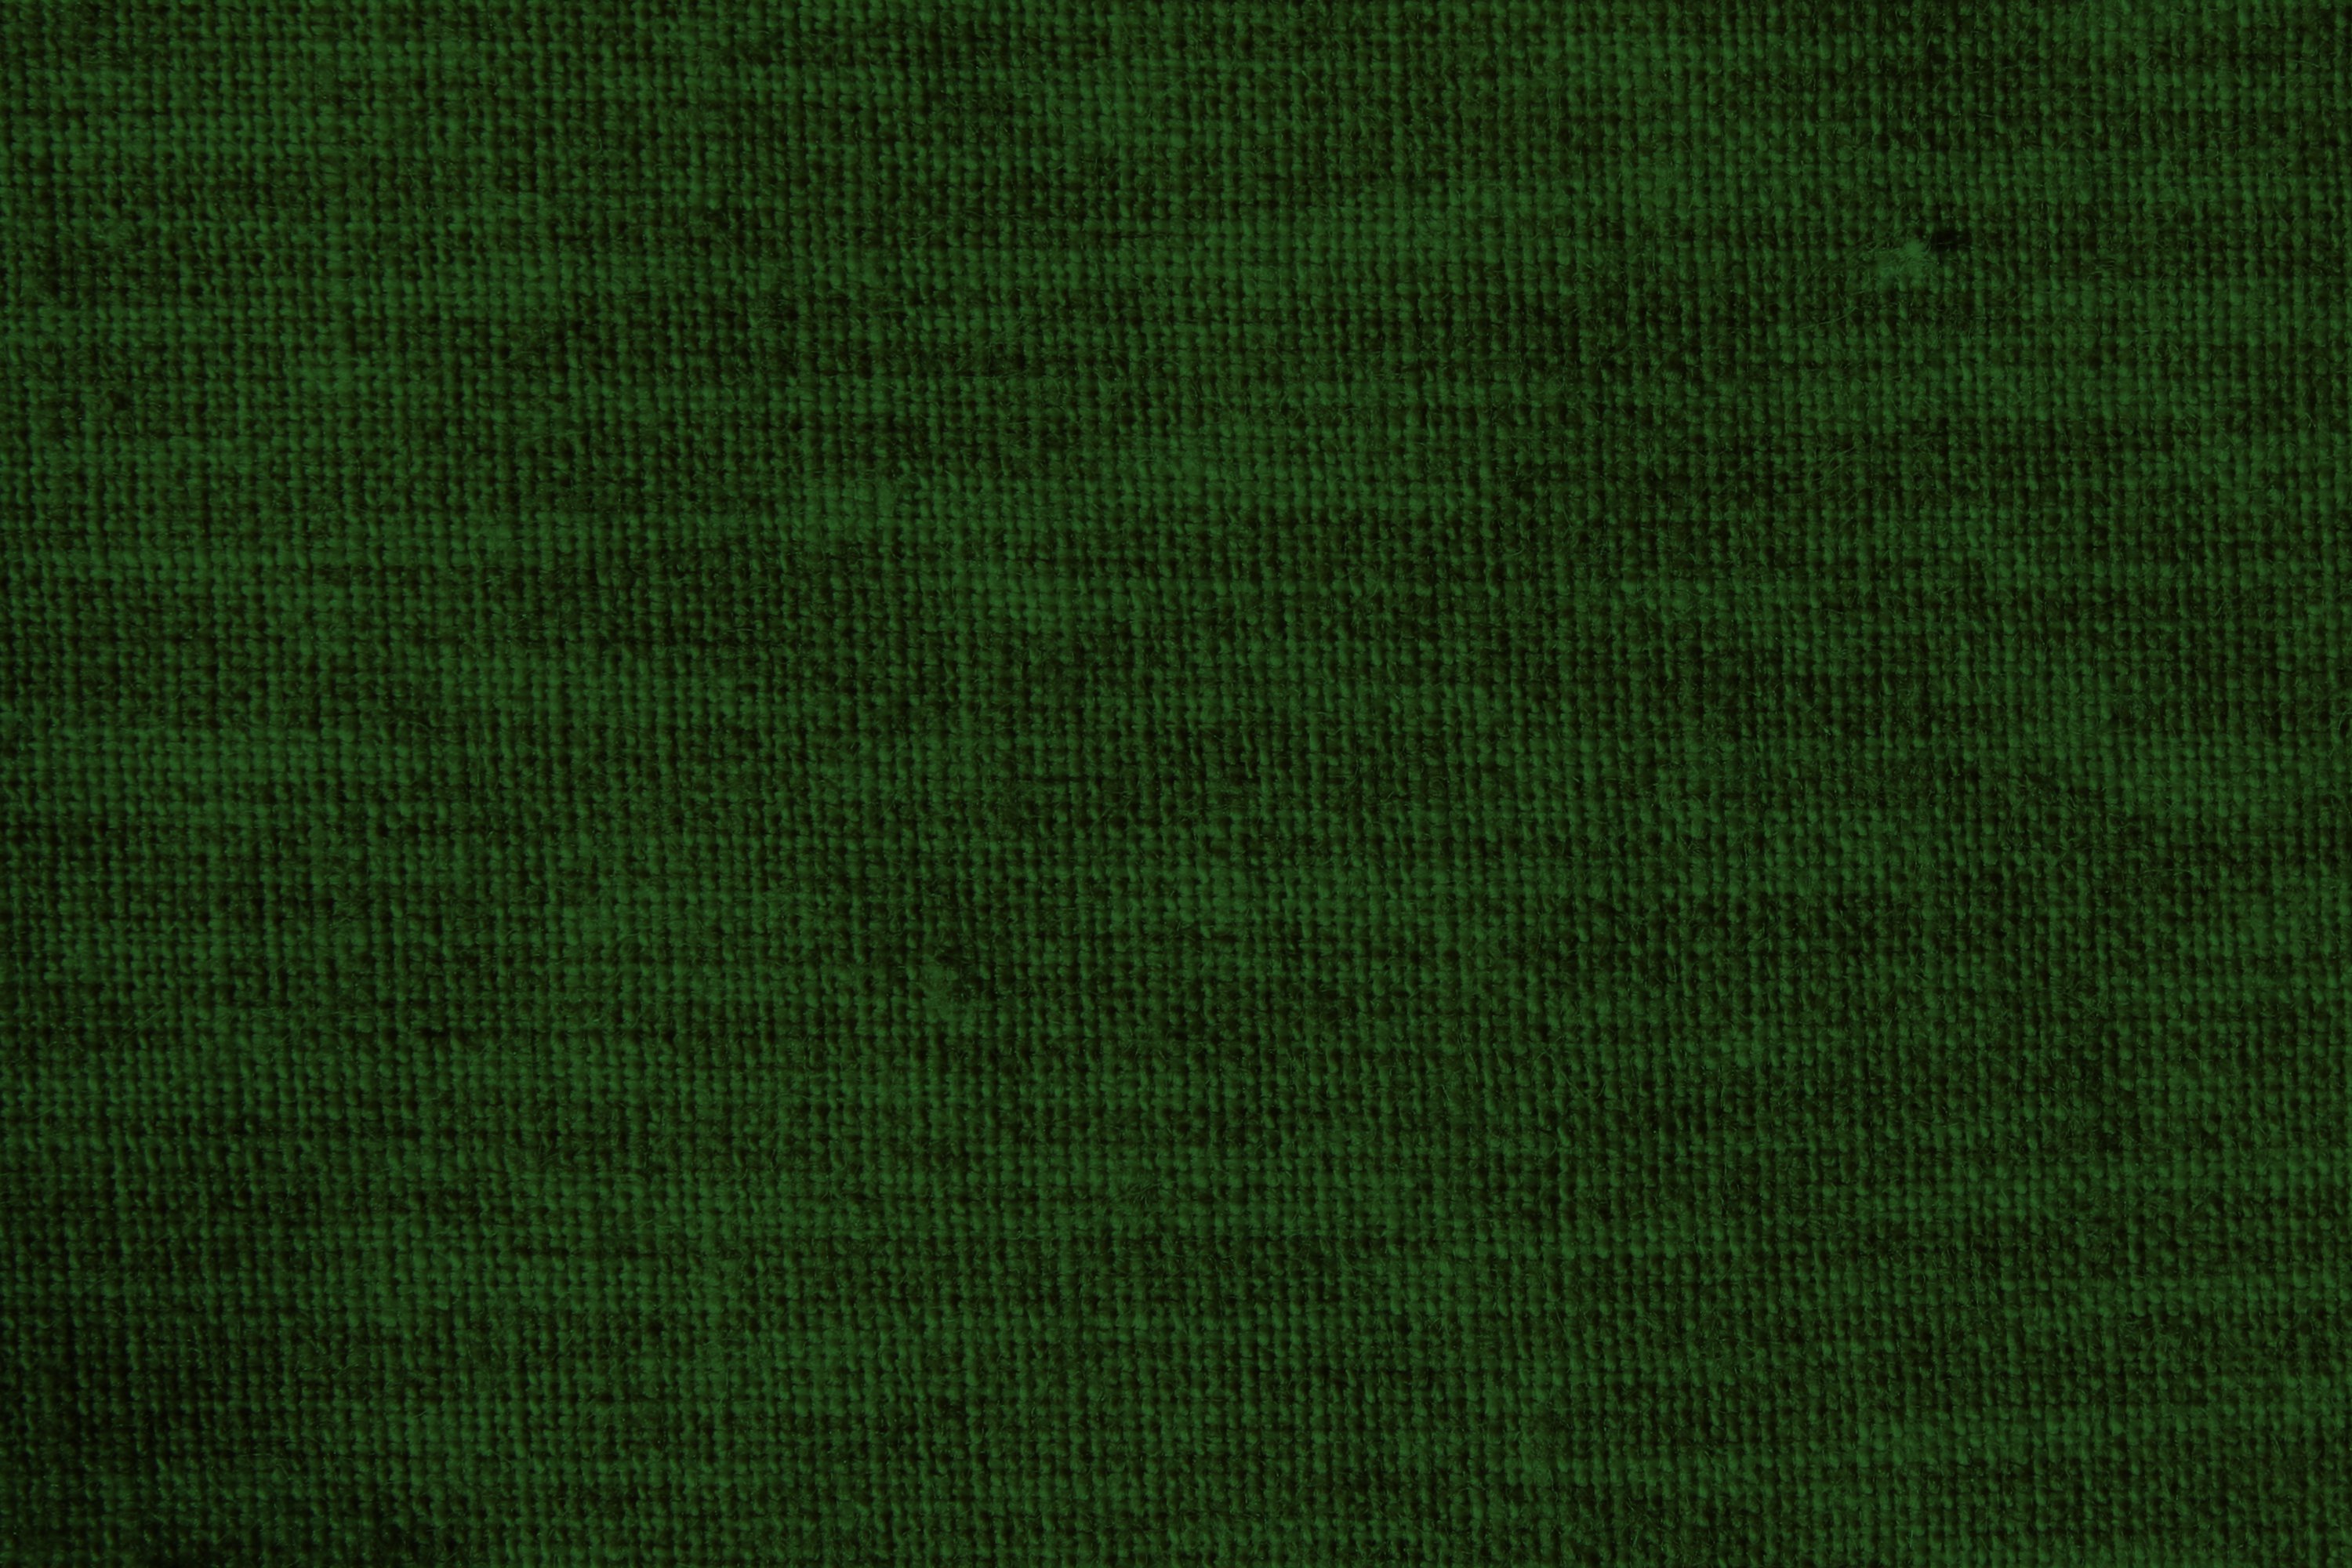 Forest Green Woven Fabric Close Up Texture Picture